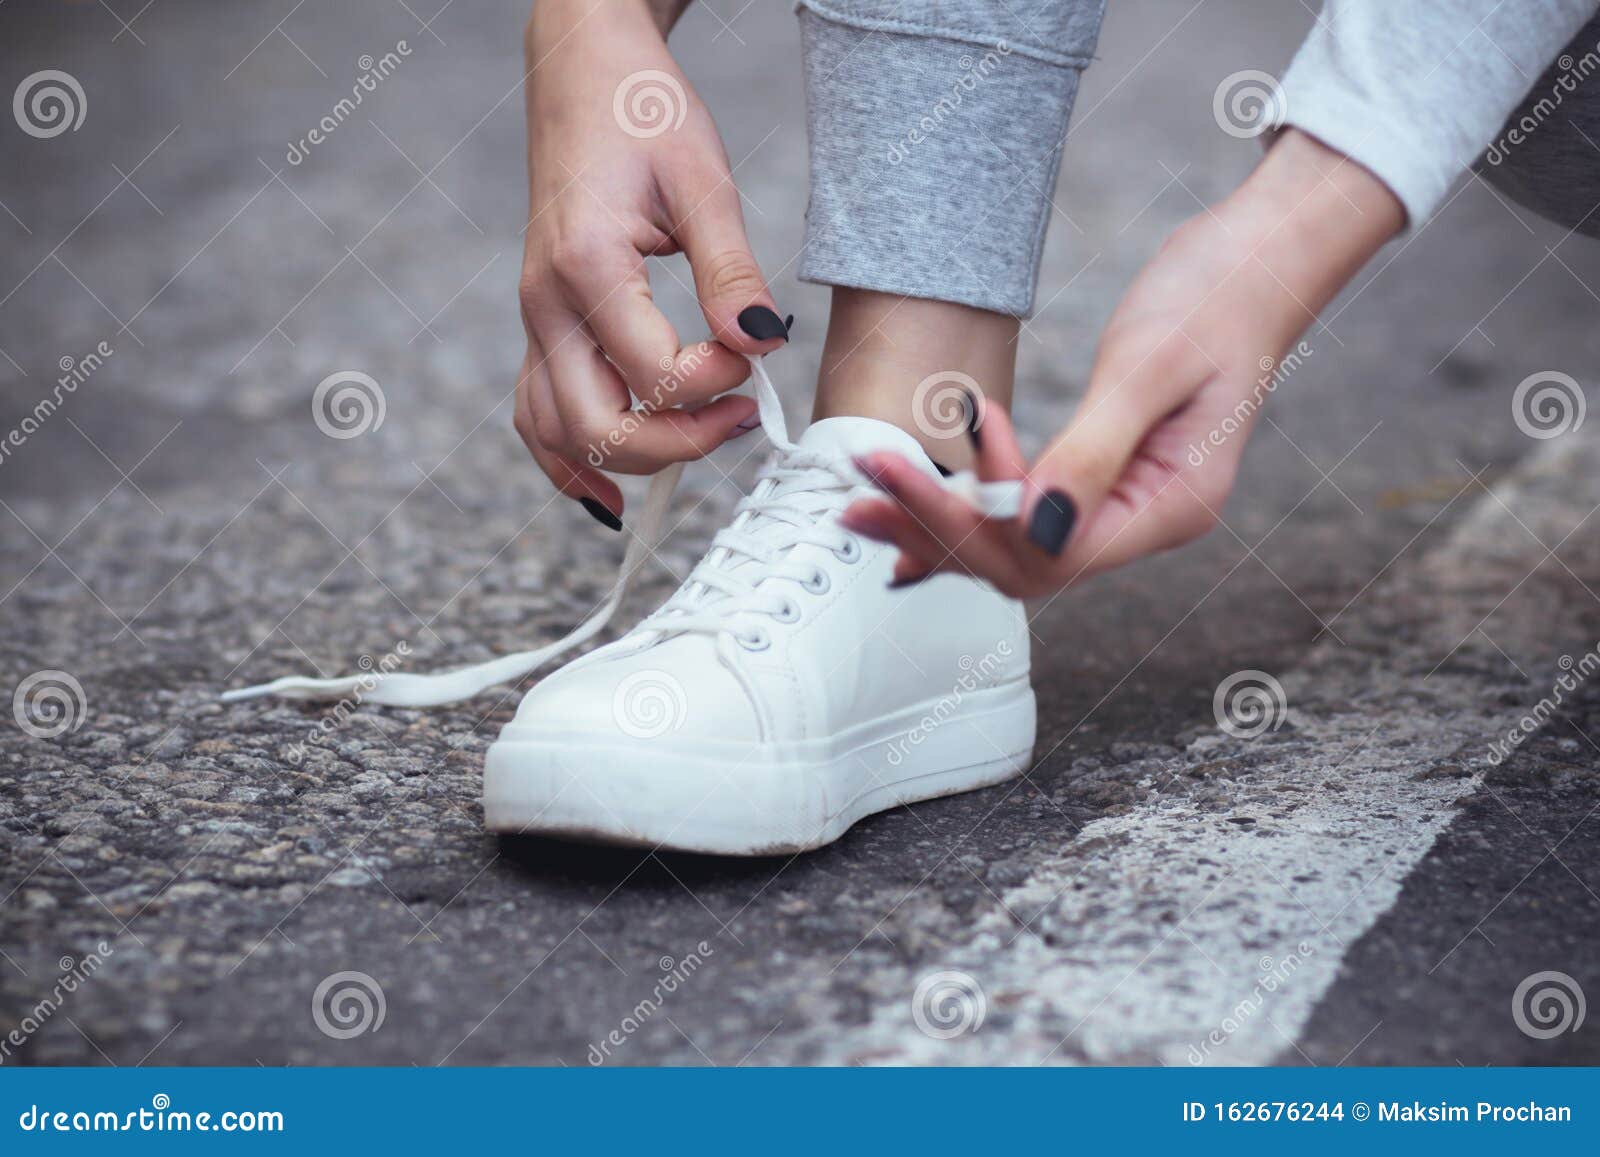 Girl Squatted Down To Tie Shoelaces on White Sneakers on Asphalt Road ...